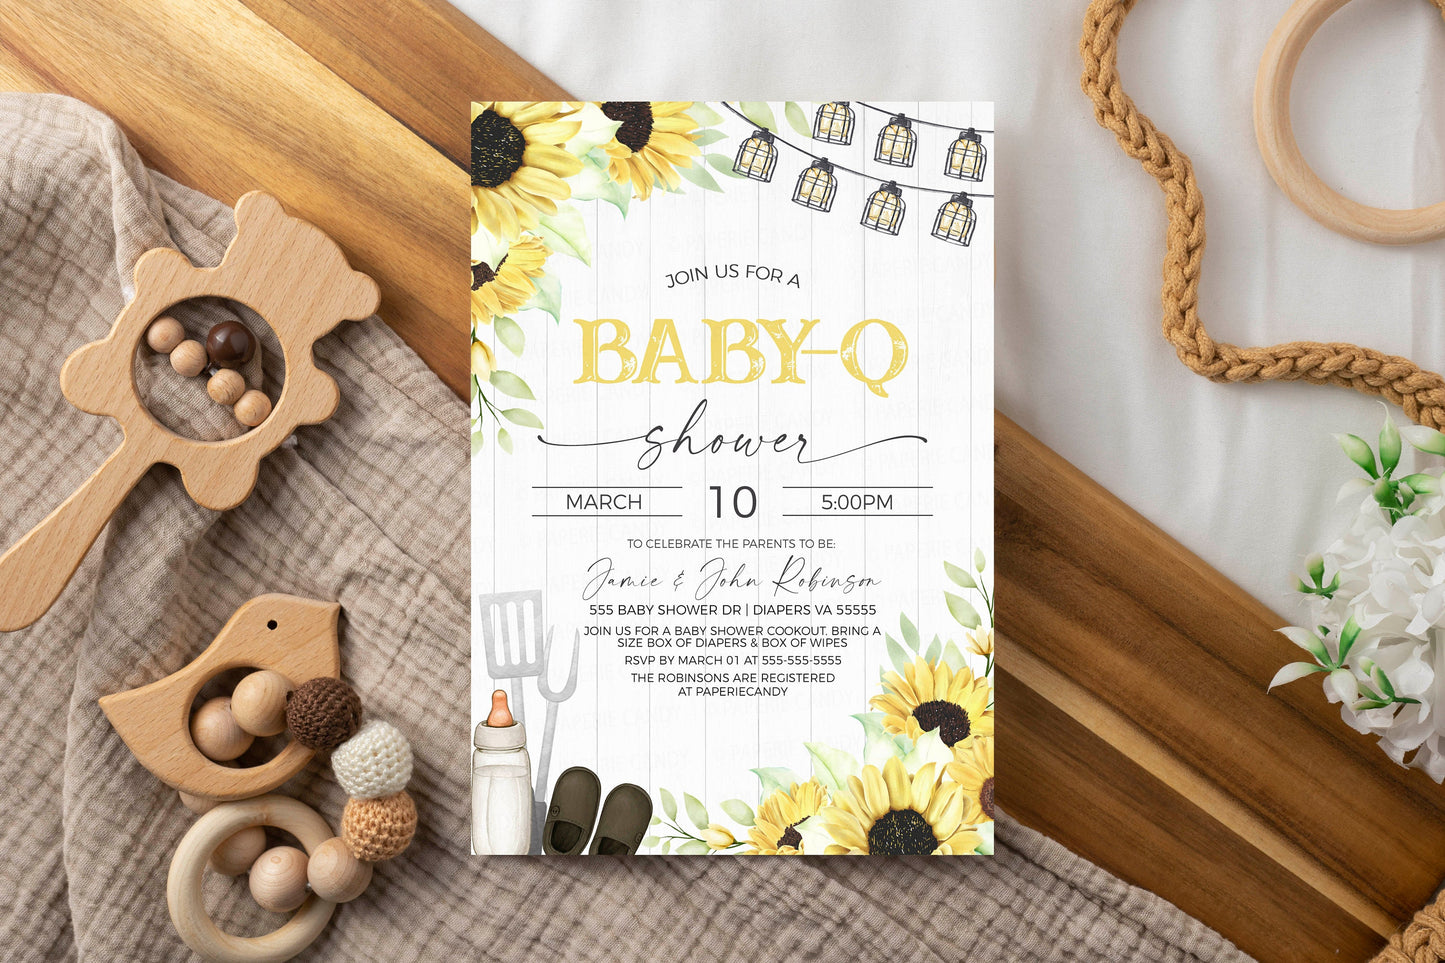 Baby-Q Baby Shower Invitation, Gender Neutral Sunflowers Baby-Q Invite, Coed Couples BBQ Burgers Beer, Backyard Barbecue, Editable Printable